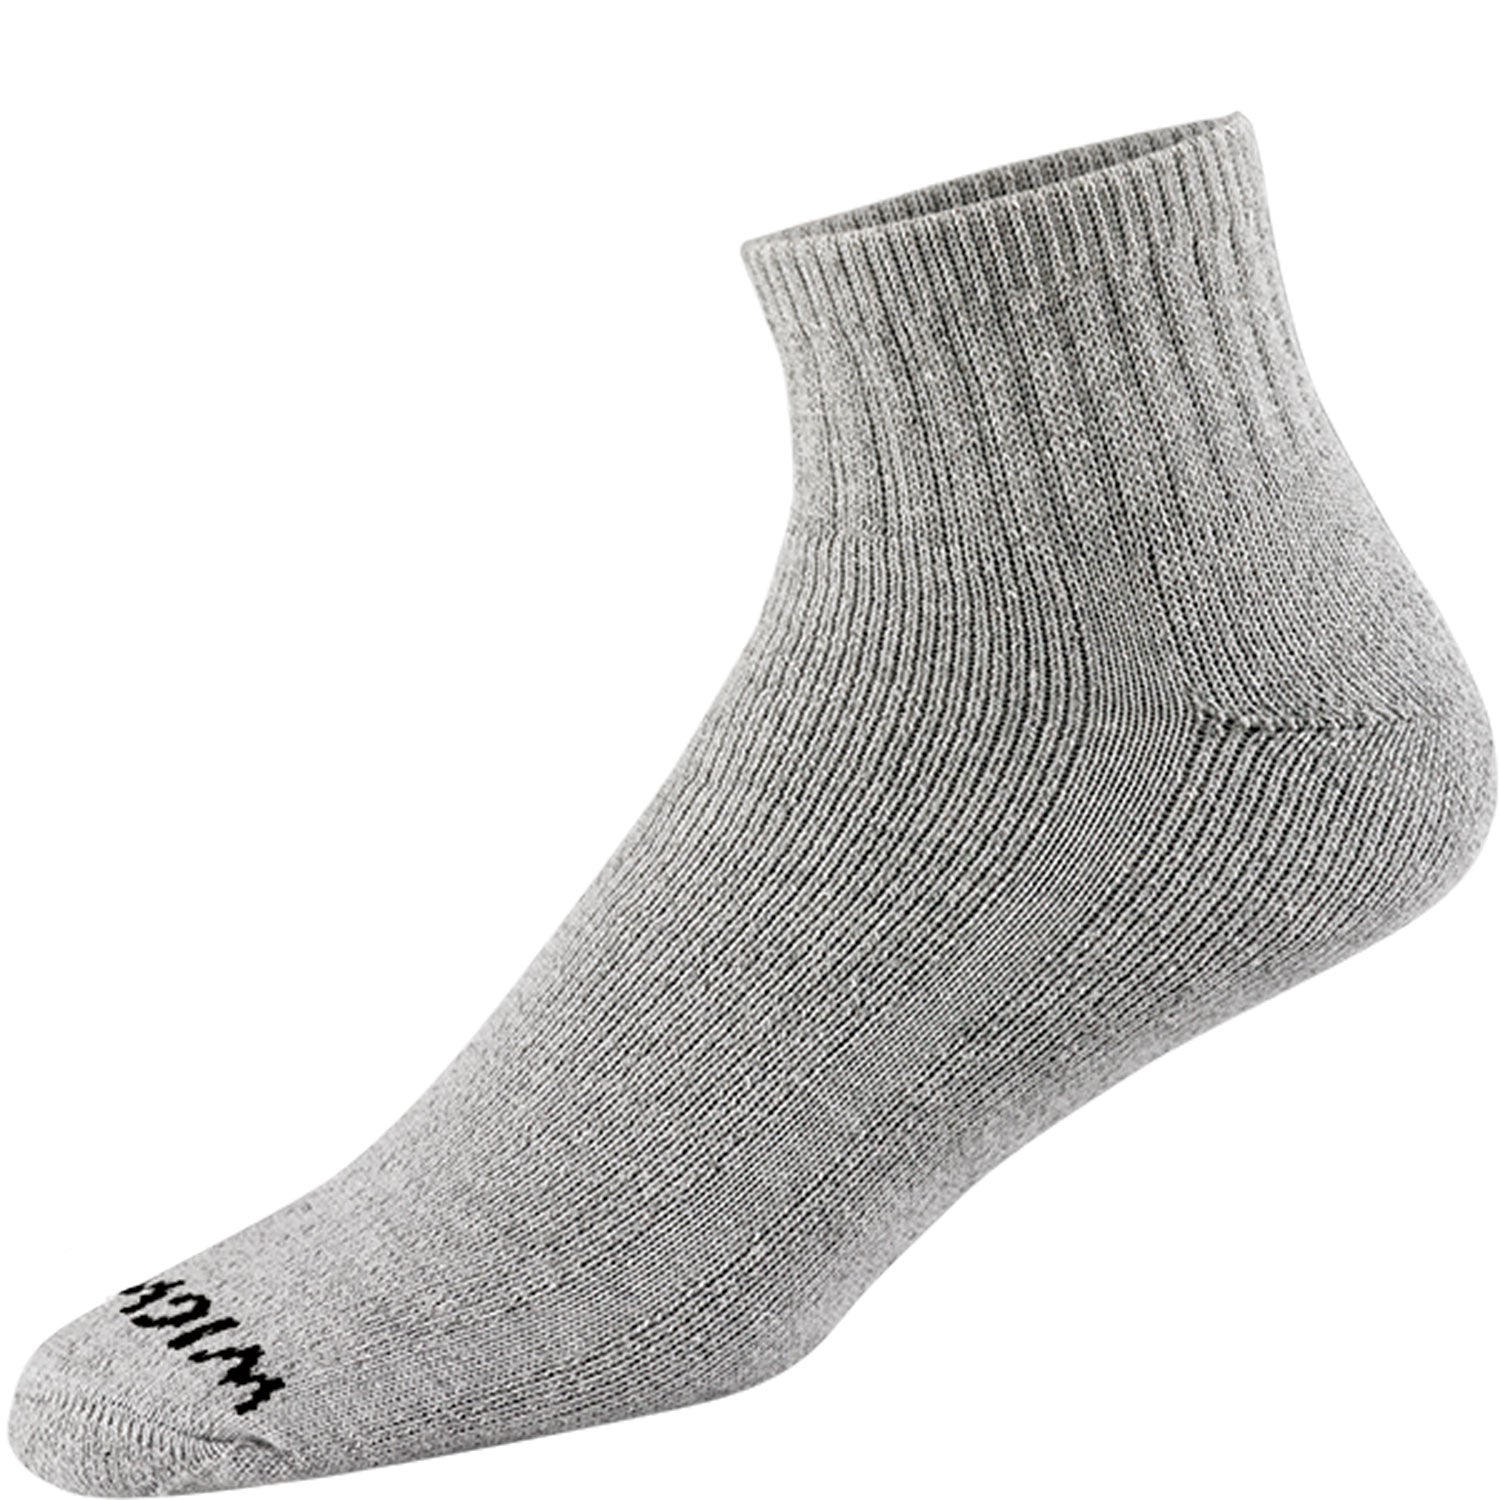 Super 60® Quarter 3-Pack Midweight Cotton Socks - Grey full product perspective - made in The USA Wigwam Socks